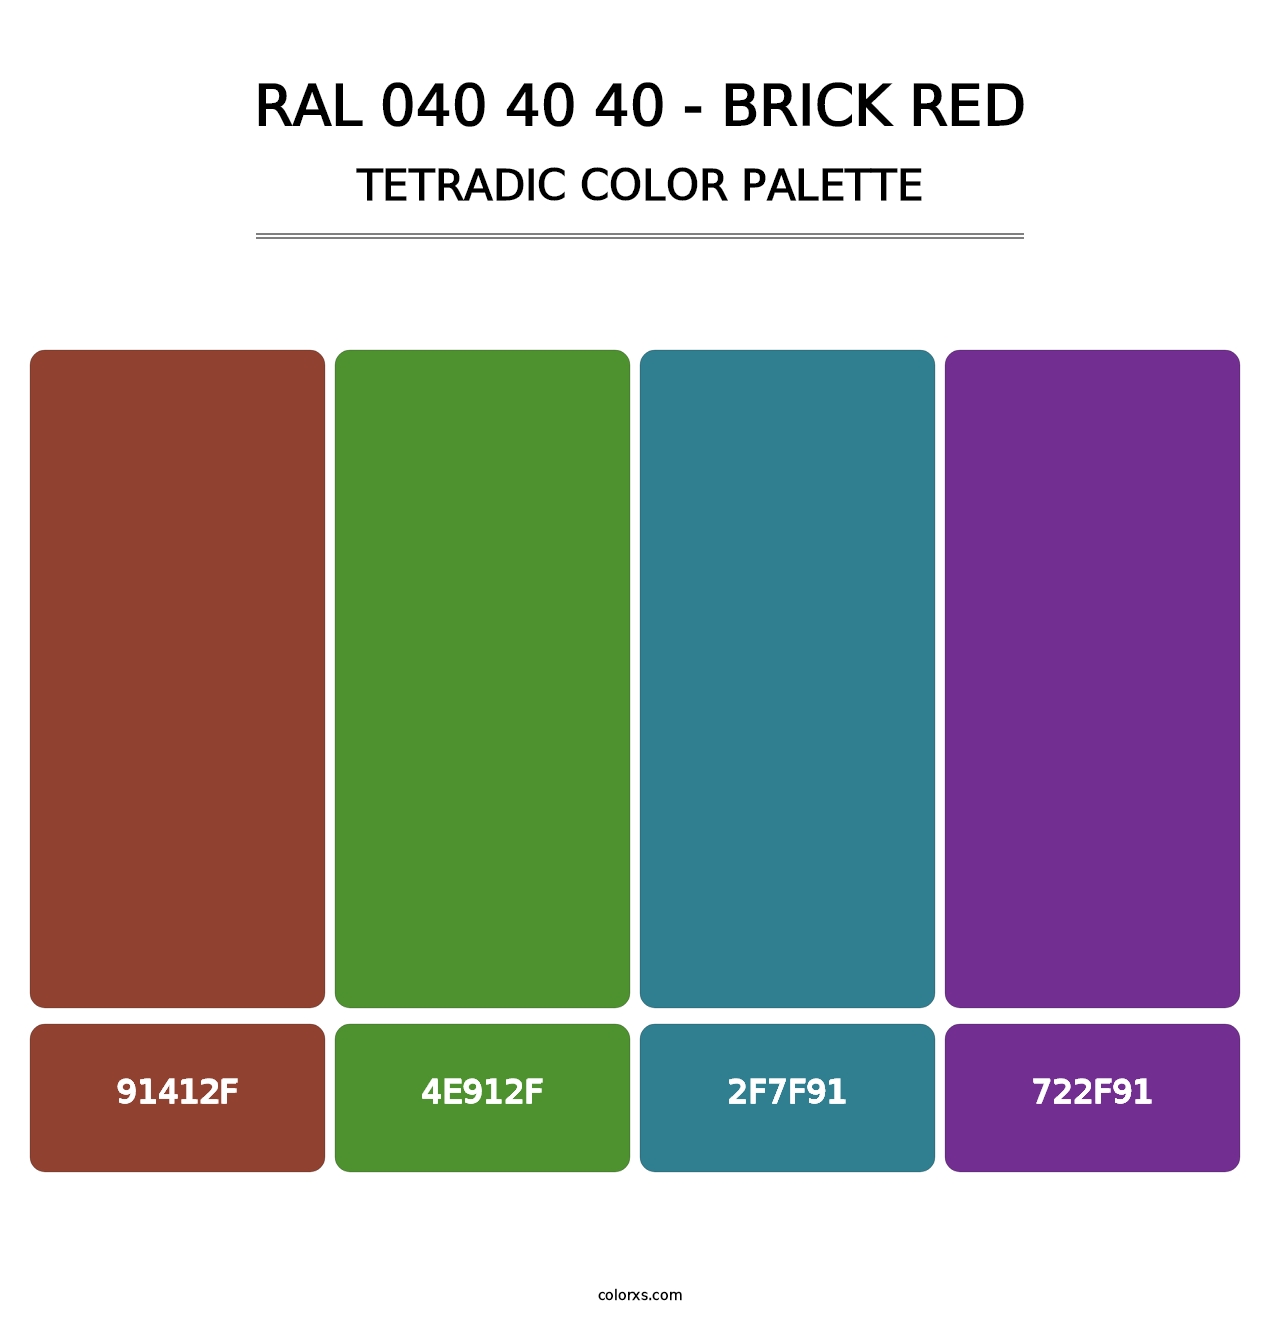 RAL 040 40 40 - Brick Red - Tetradic Color Palette